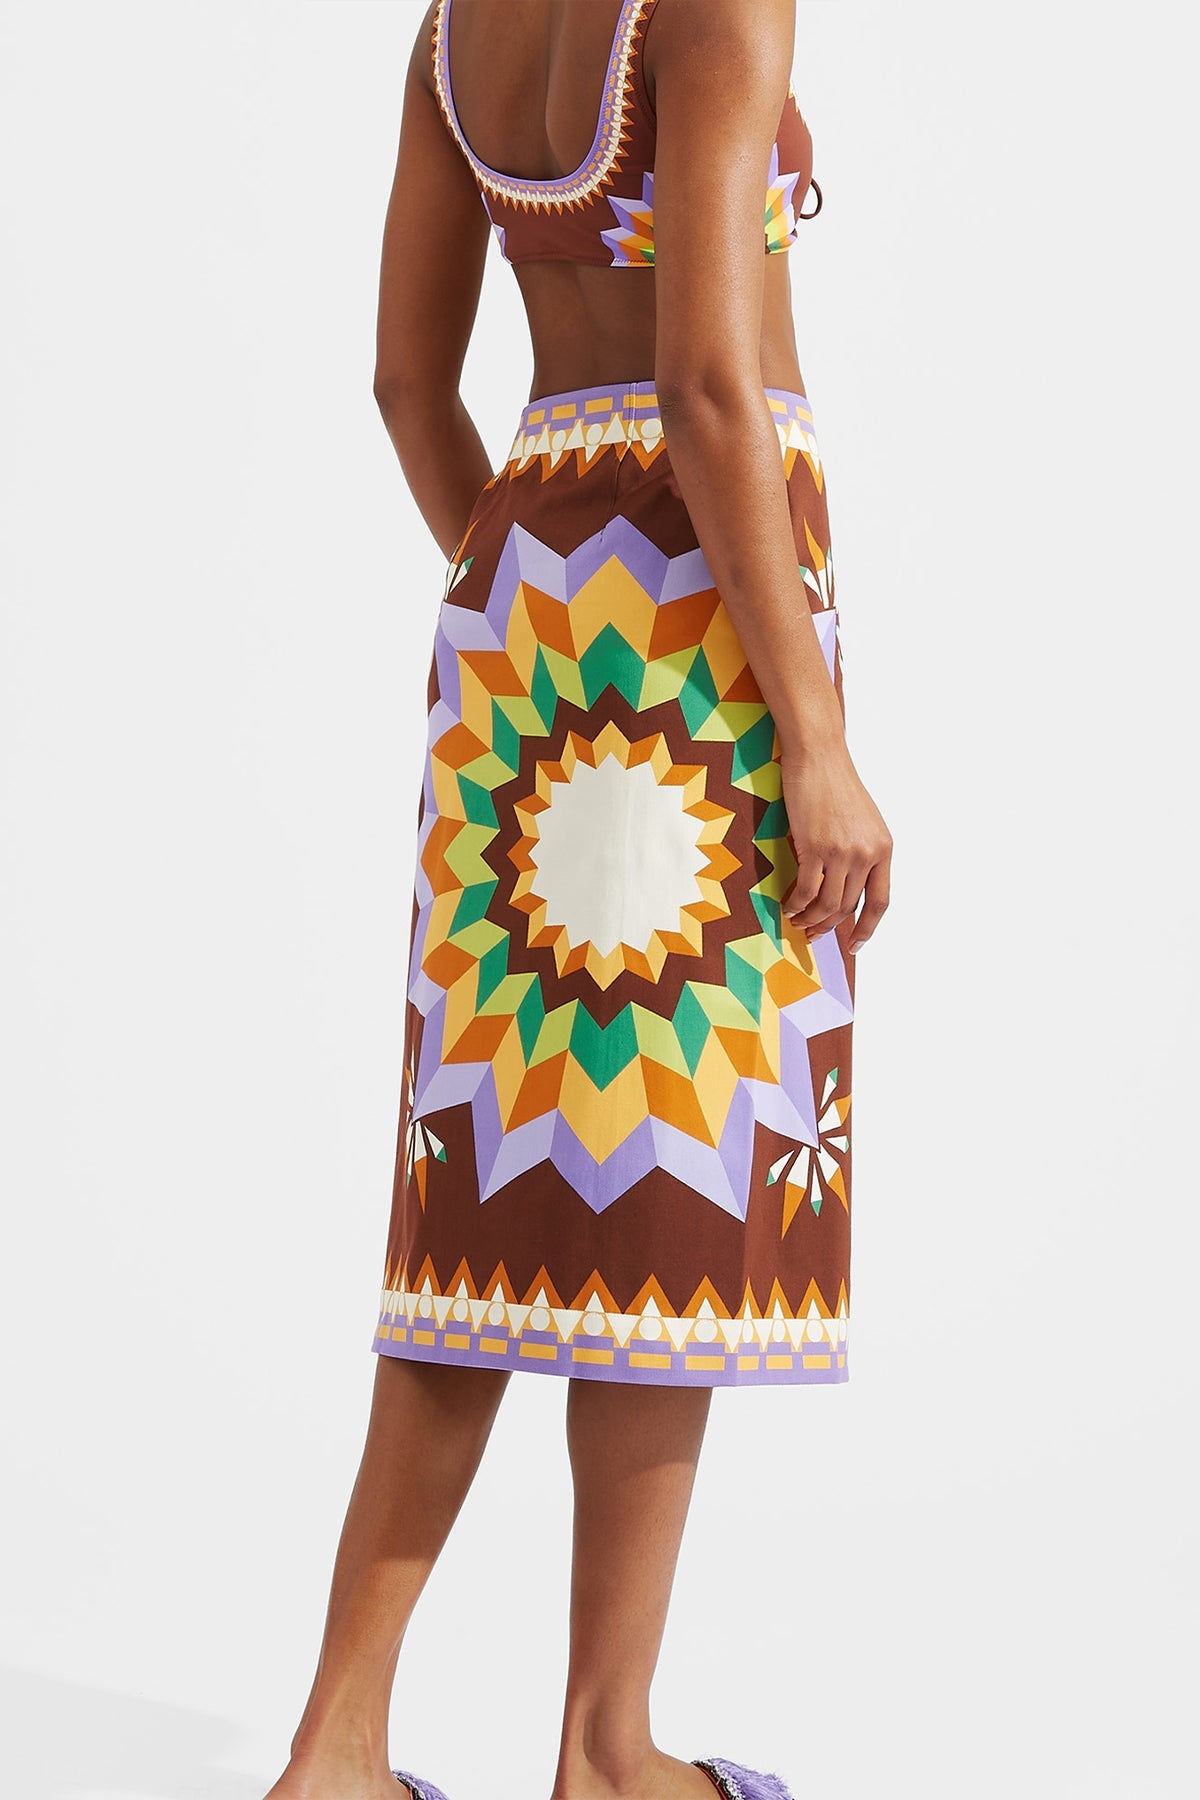 2-Way Pareo Skirt in Sunset Moro Placee - shop-olivia.com